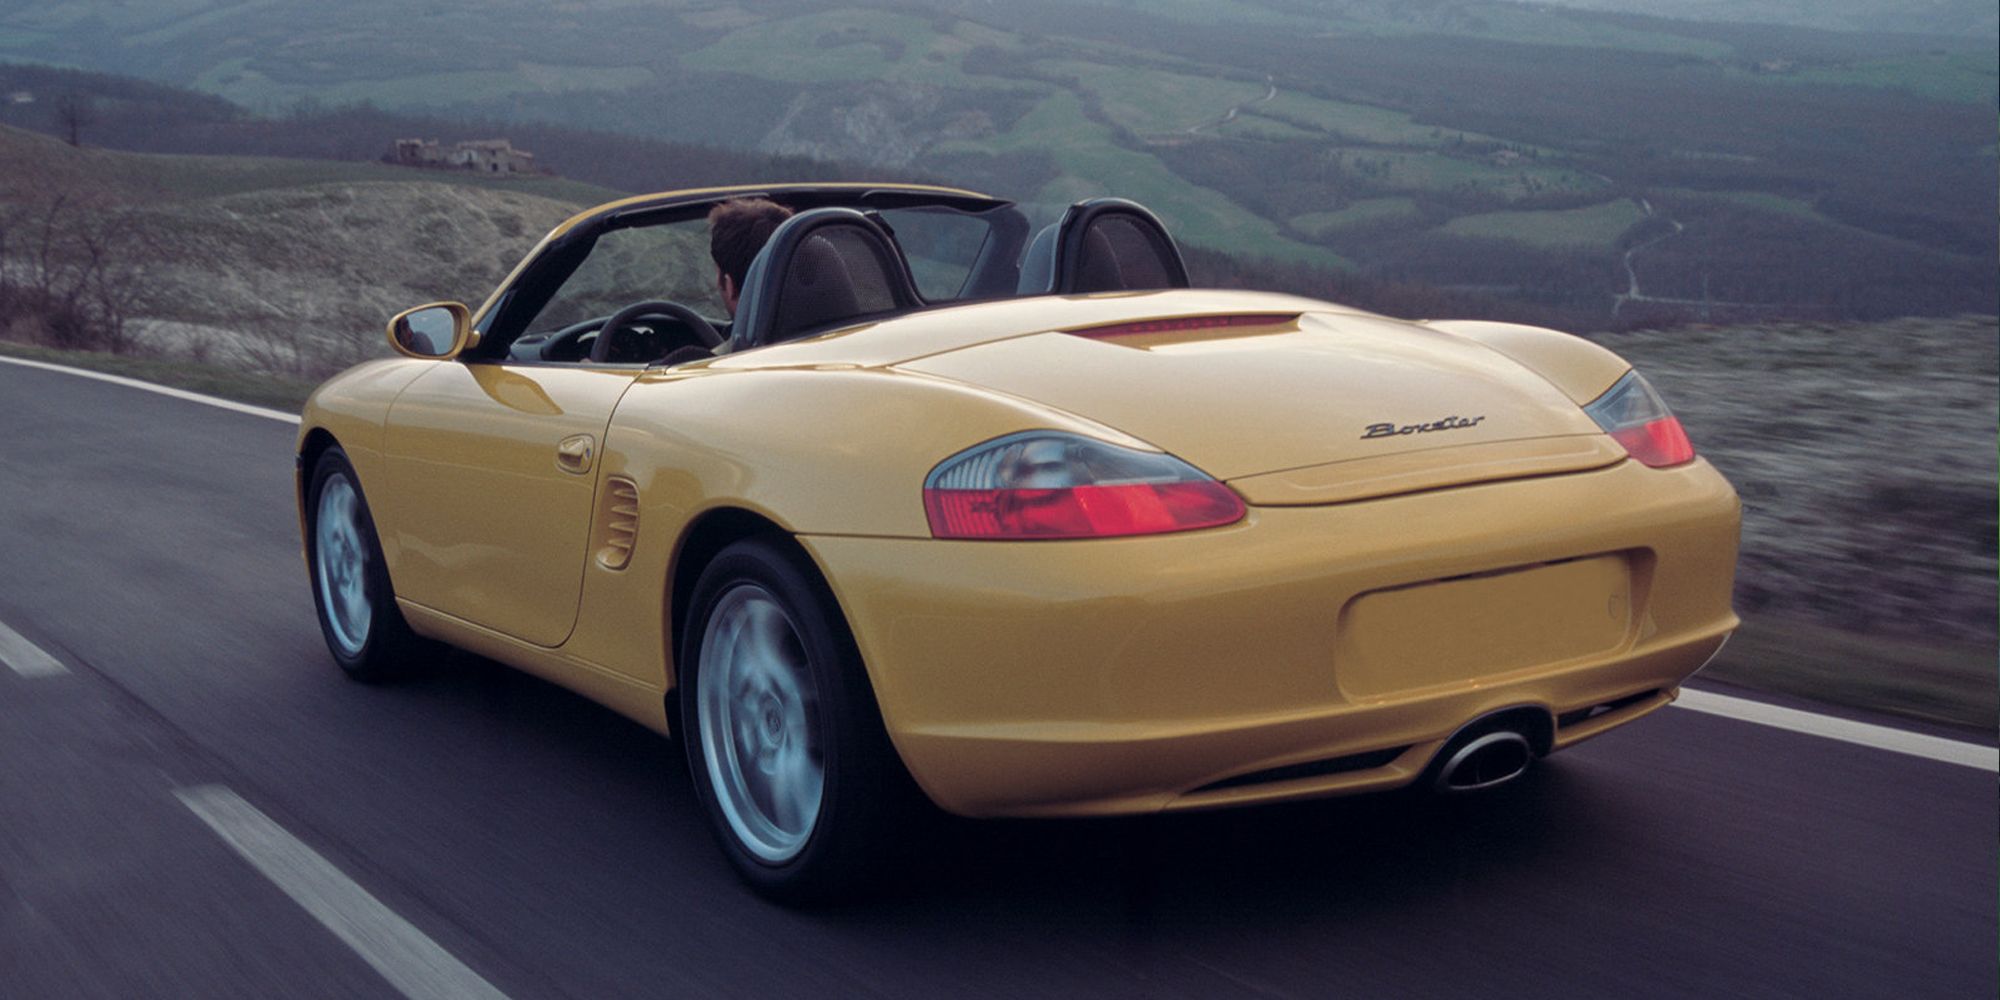 The rear of a yellow Boxster